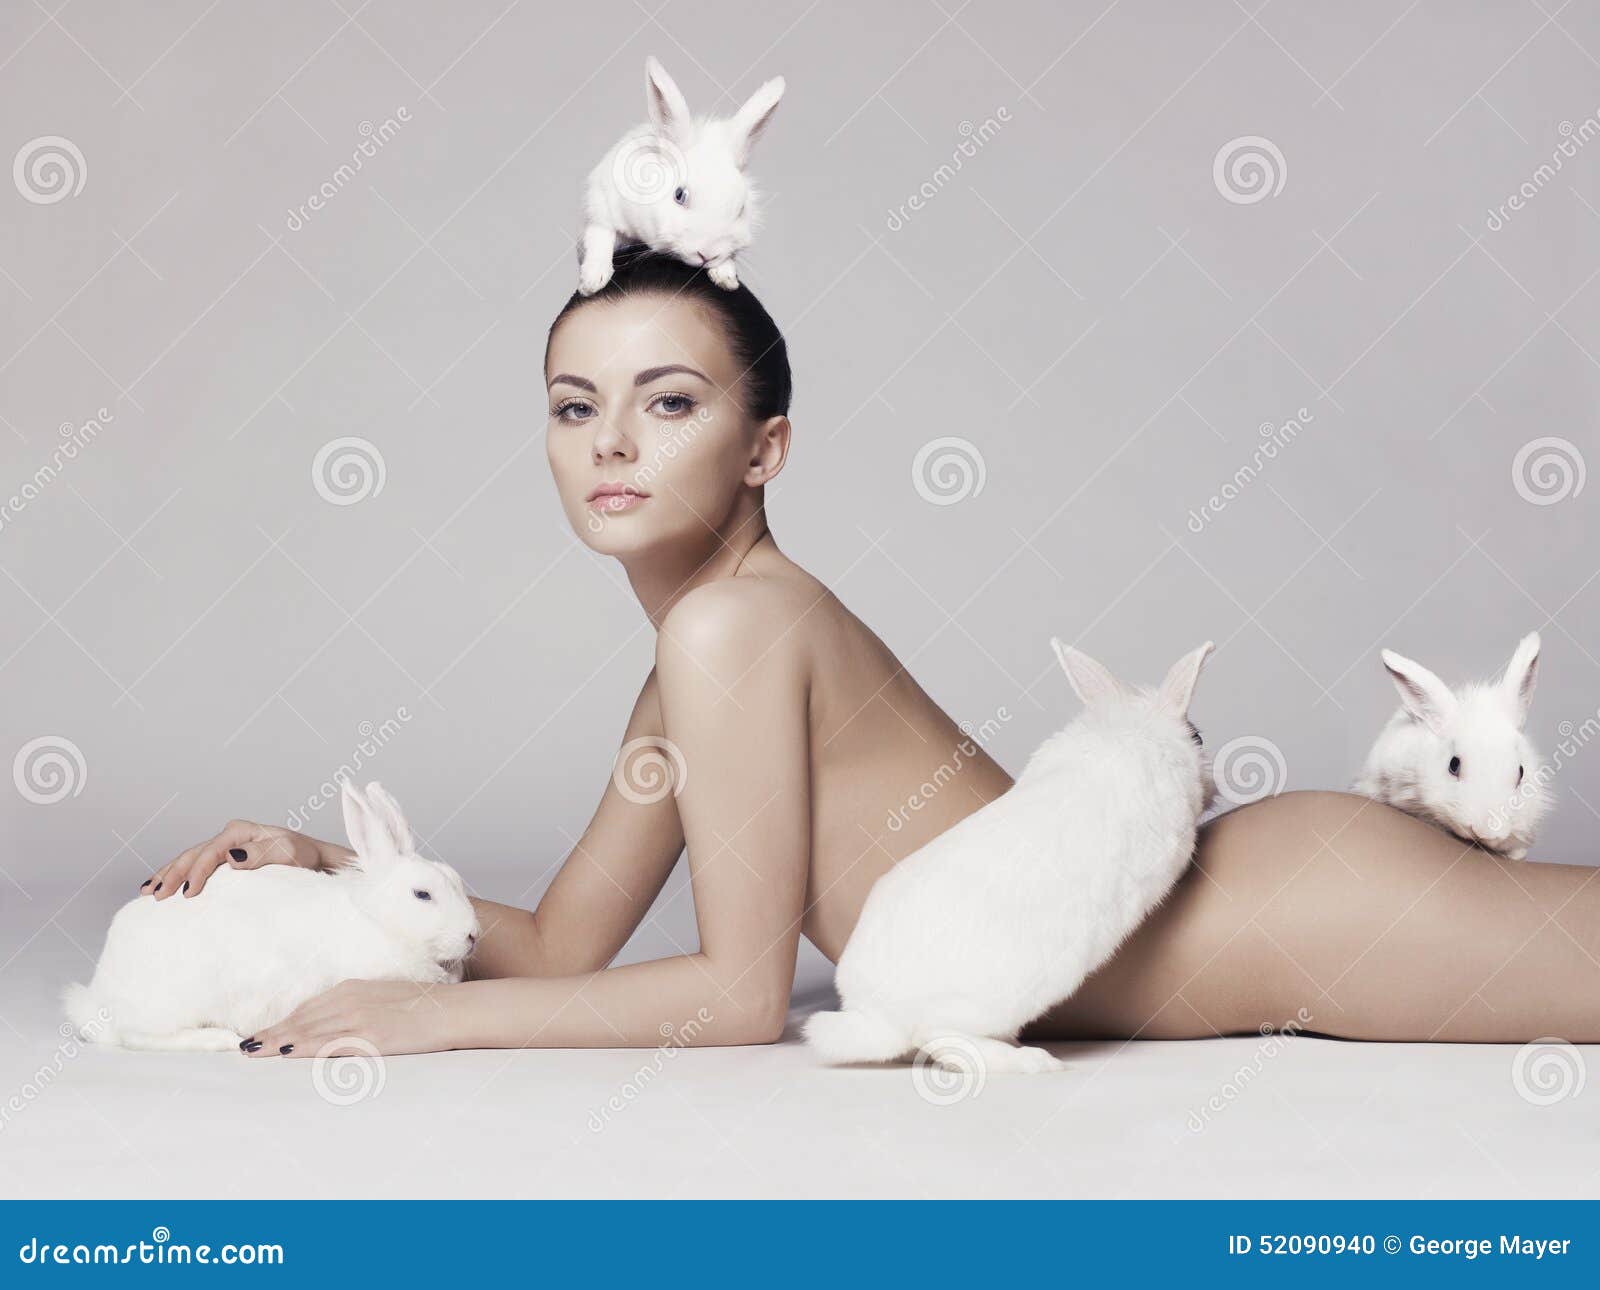 Bunny-phobic Photographer Does Nudes With Scary Bunny Masks - TheSword.com